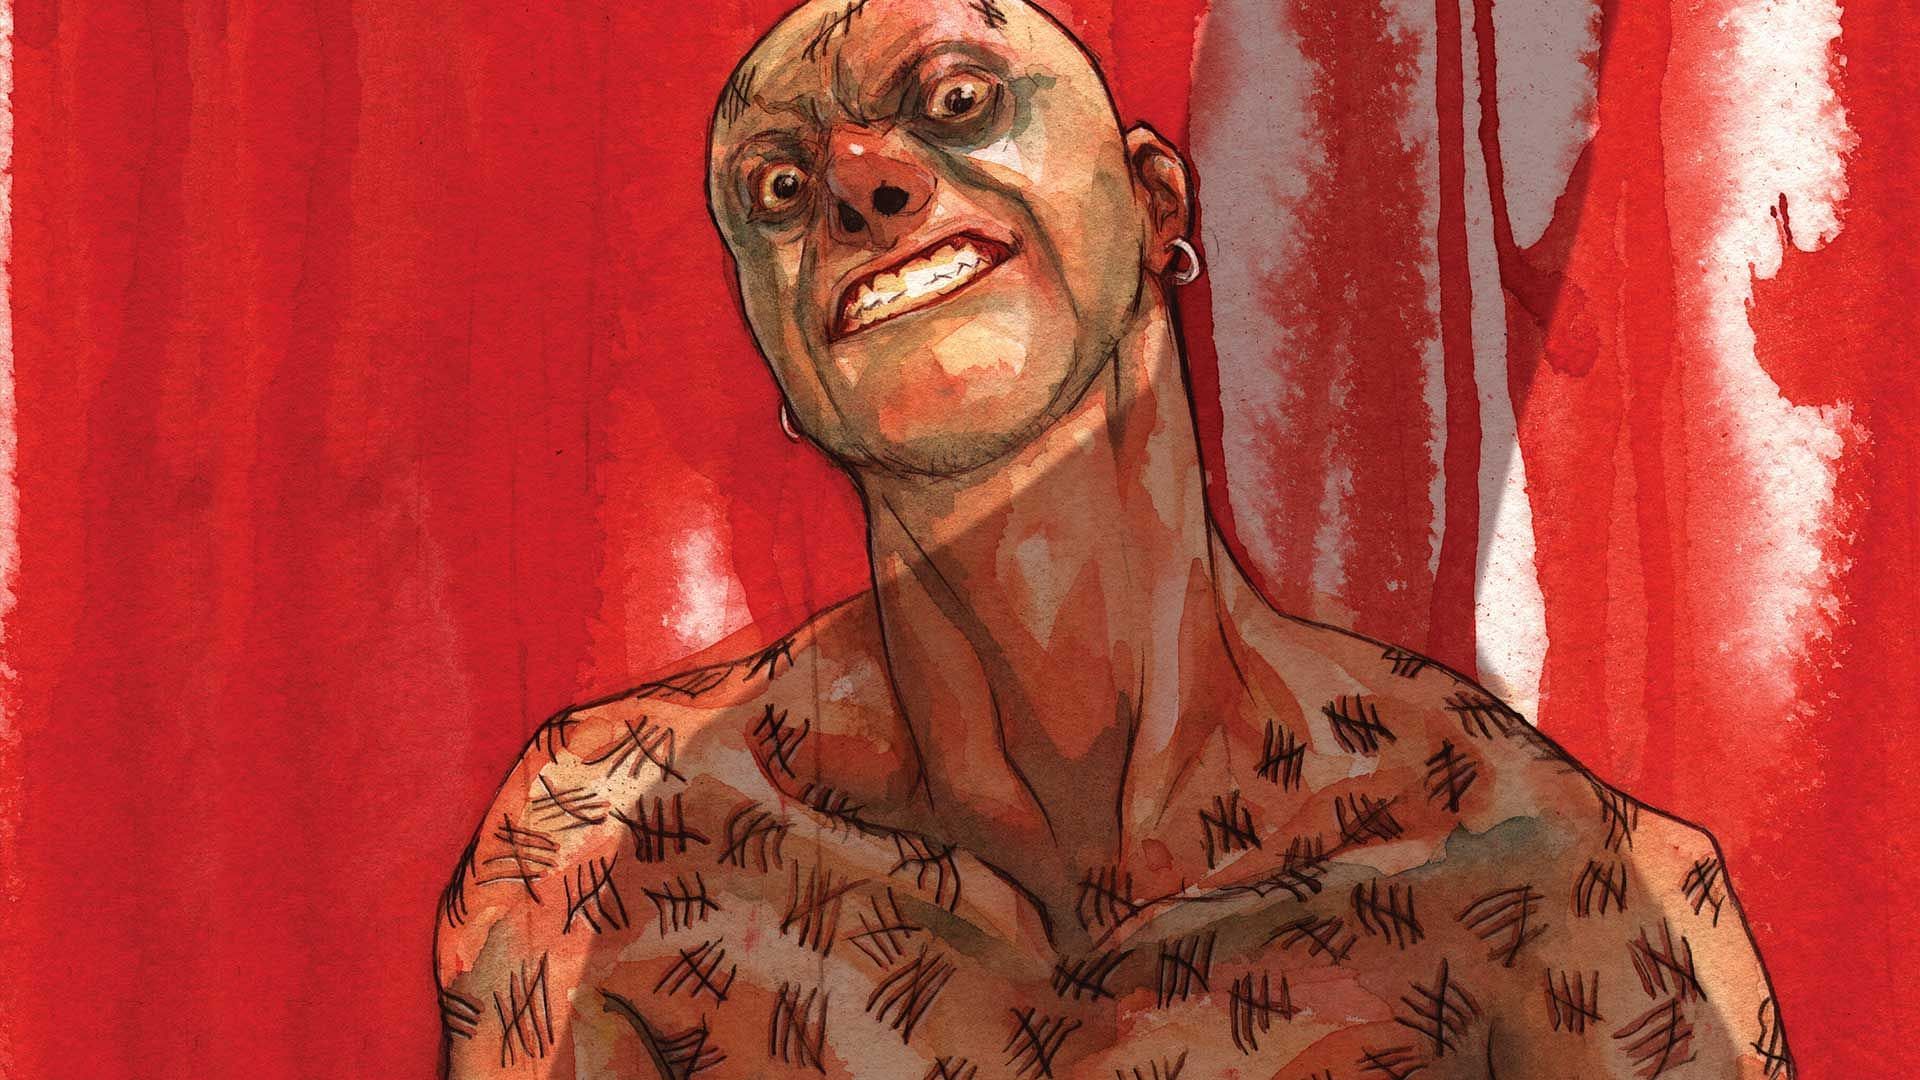 Victor Zsasz as he appeared in the comics (Image via DC Comics)